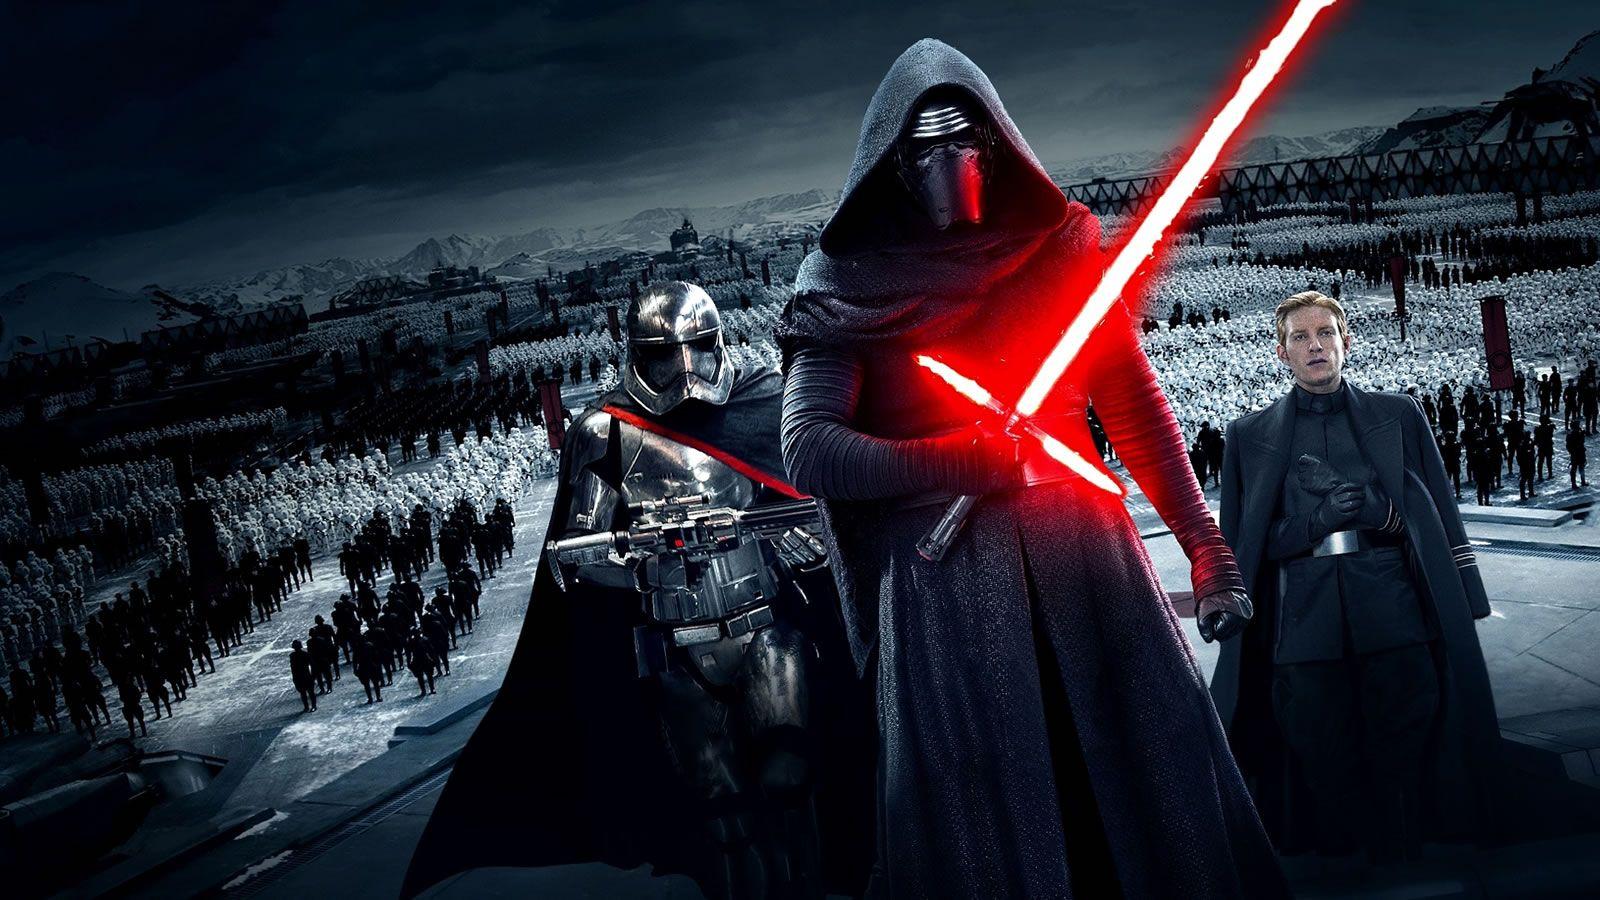 Star Wars The Force Awakens Wallpapers 3